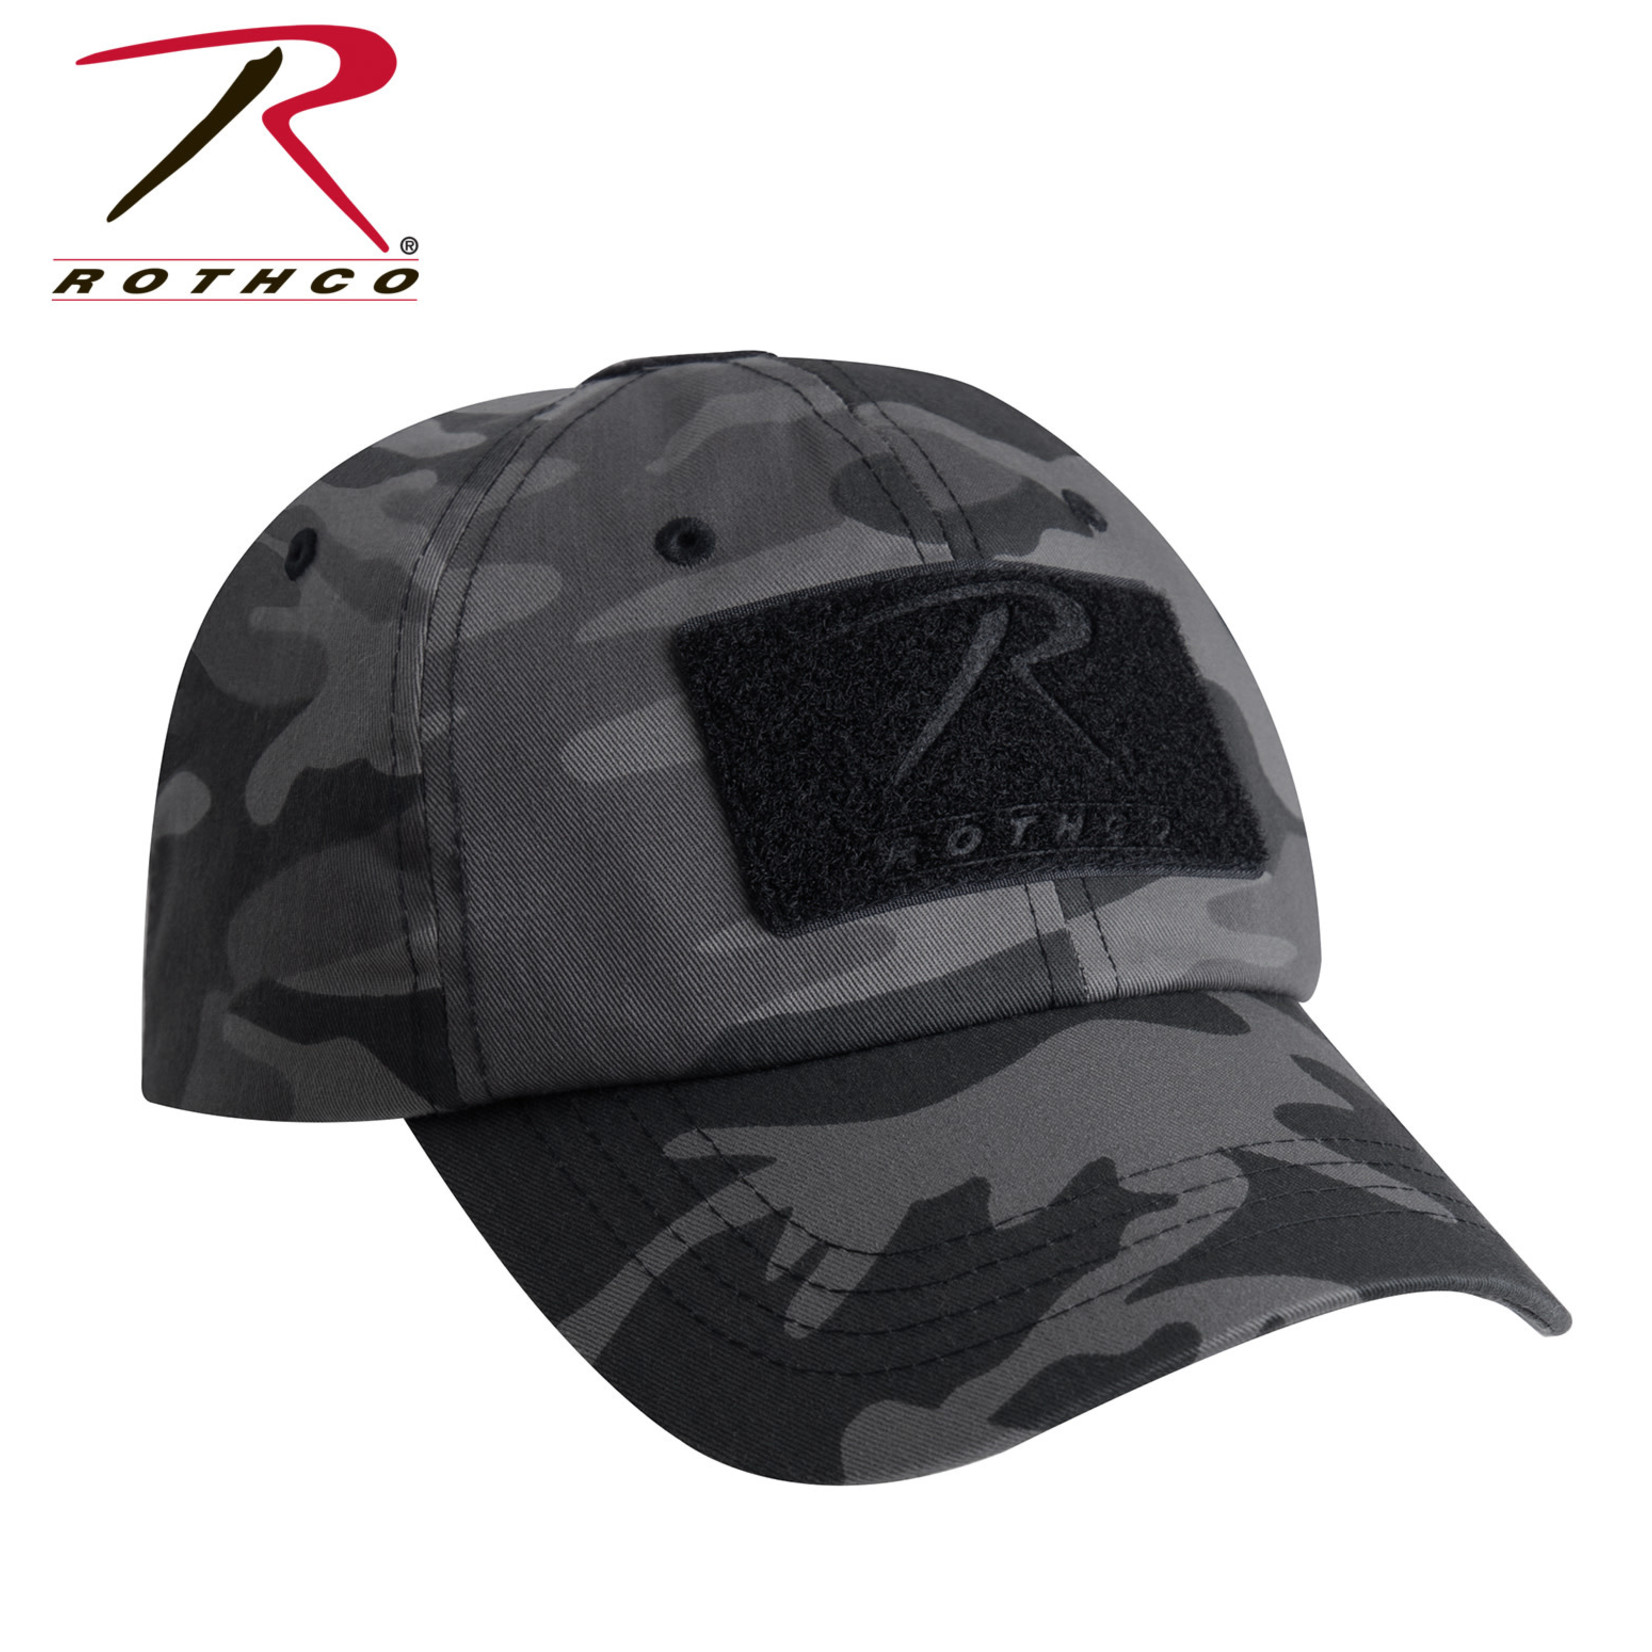 Rothco Rothco Patch-Ready Classic Camo Tactical Cap -